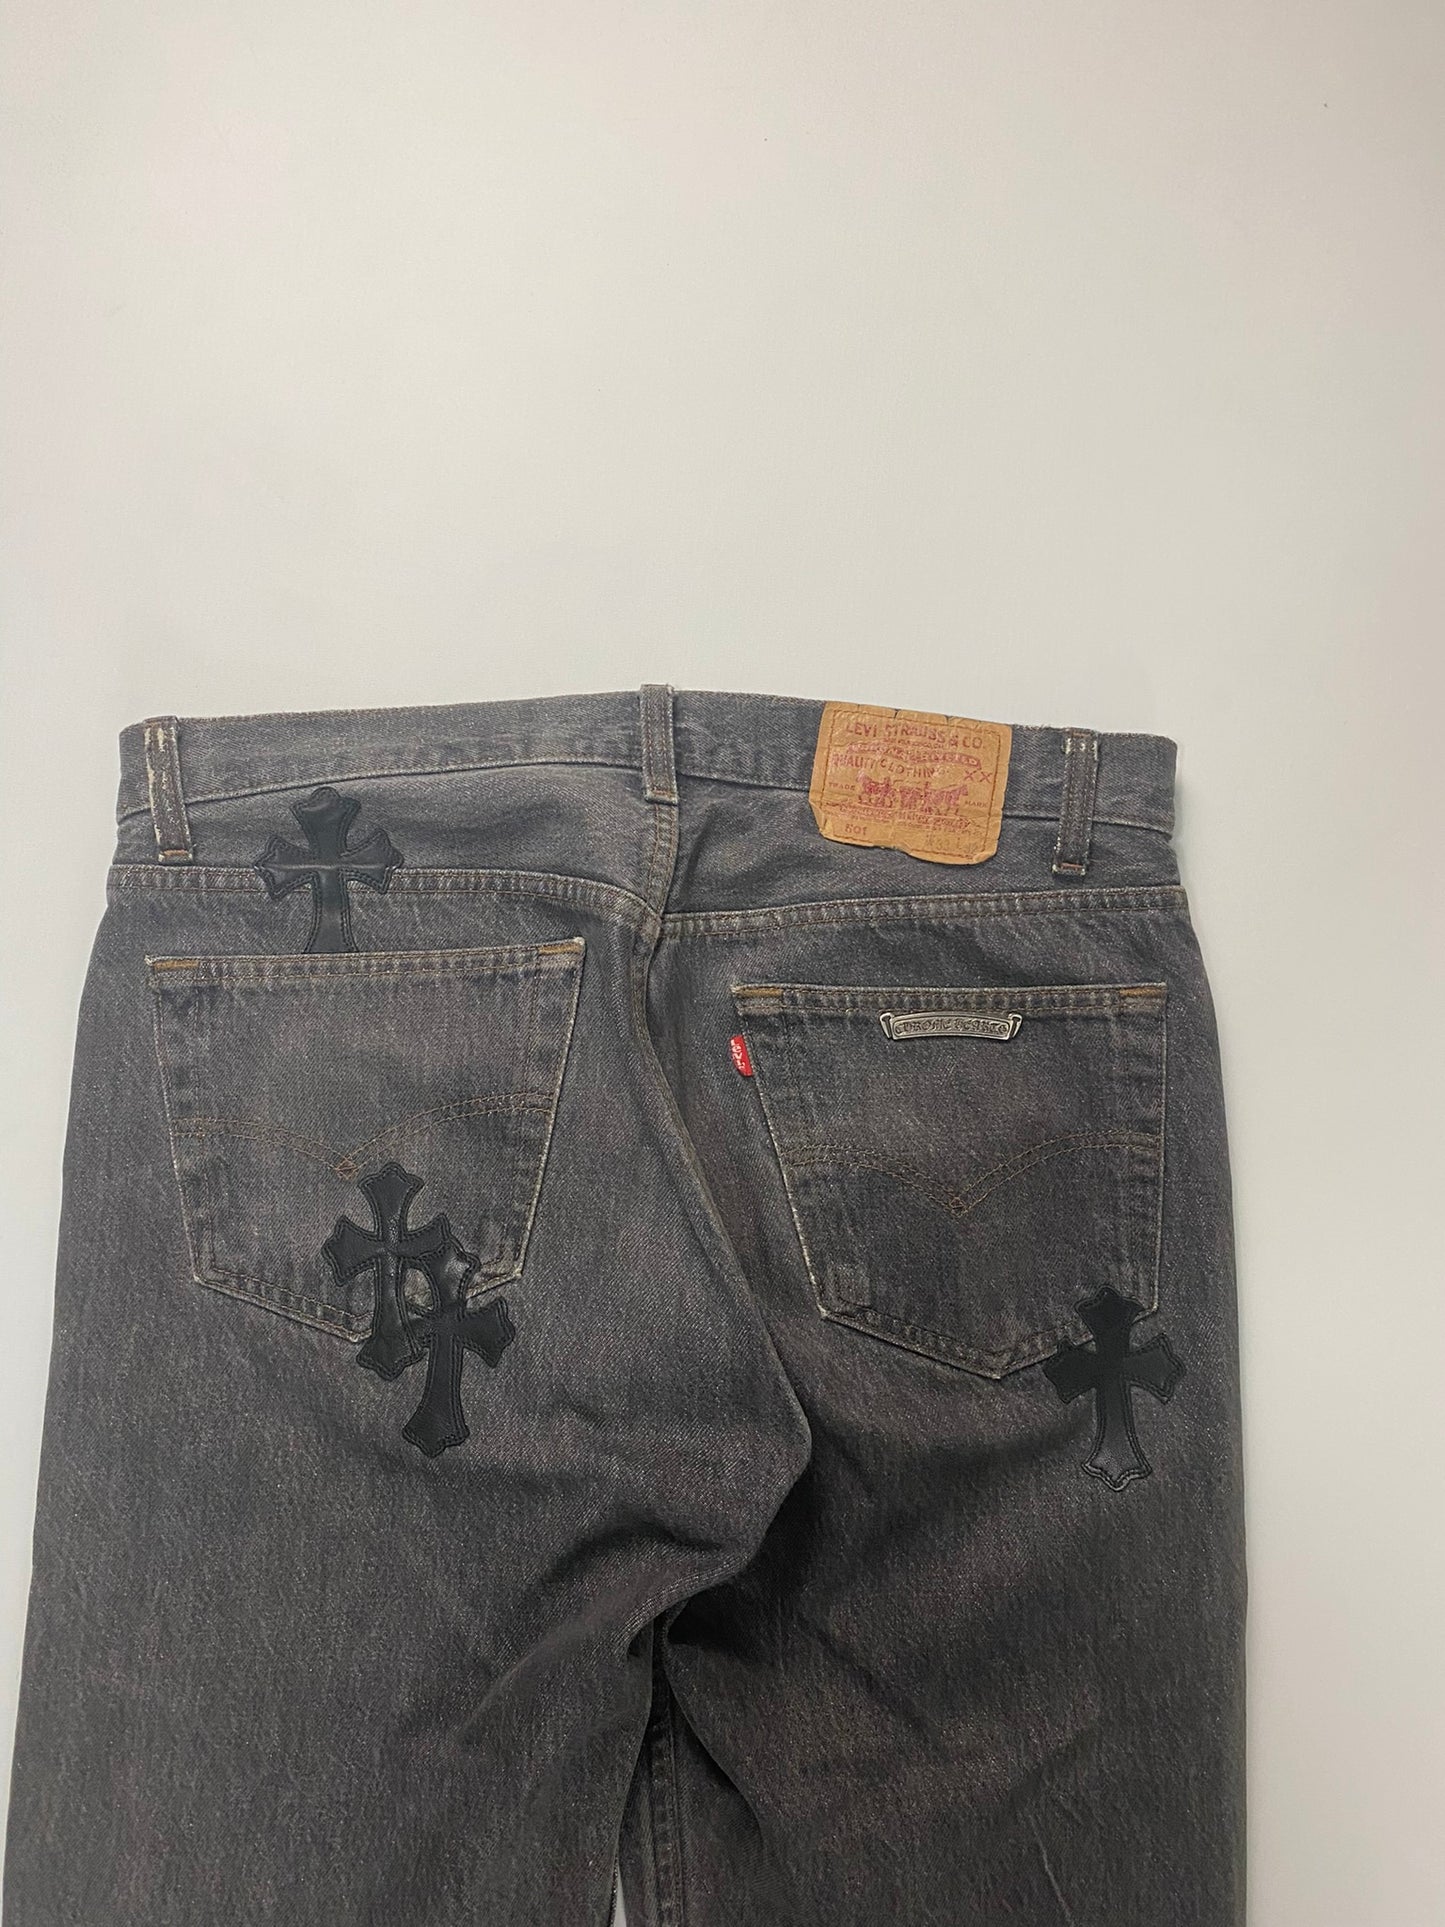 Chrome Hearts Levi’s 501 cross patched jeans in washed out black / grey SZ:W32